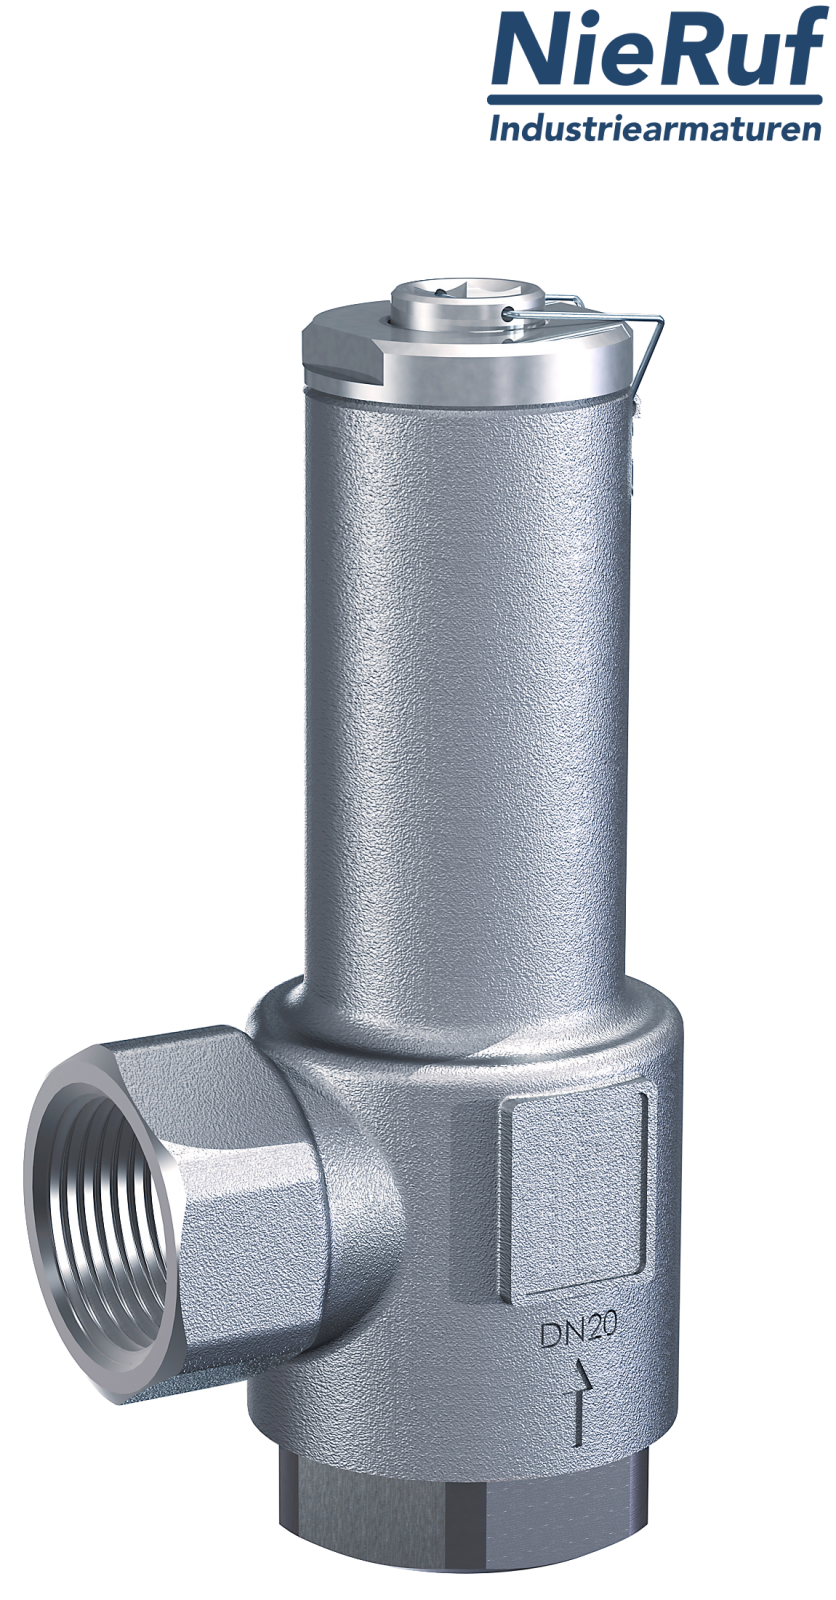 angle-type overflow valve 3/4" inch fm UV04 stainless steel AISI 316L 12 - 20 bar